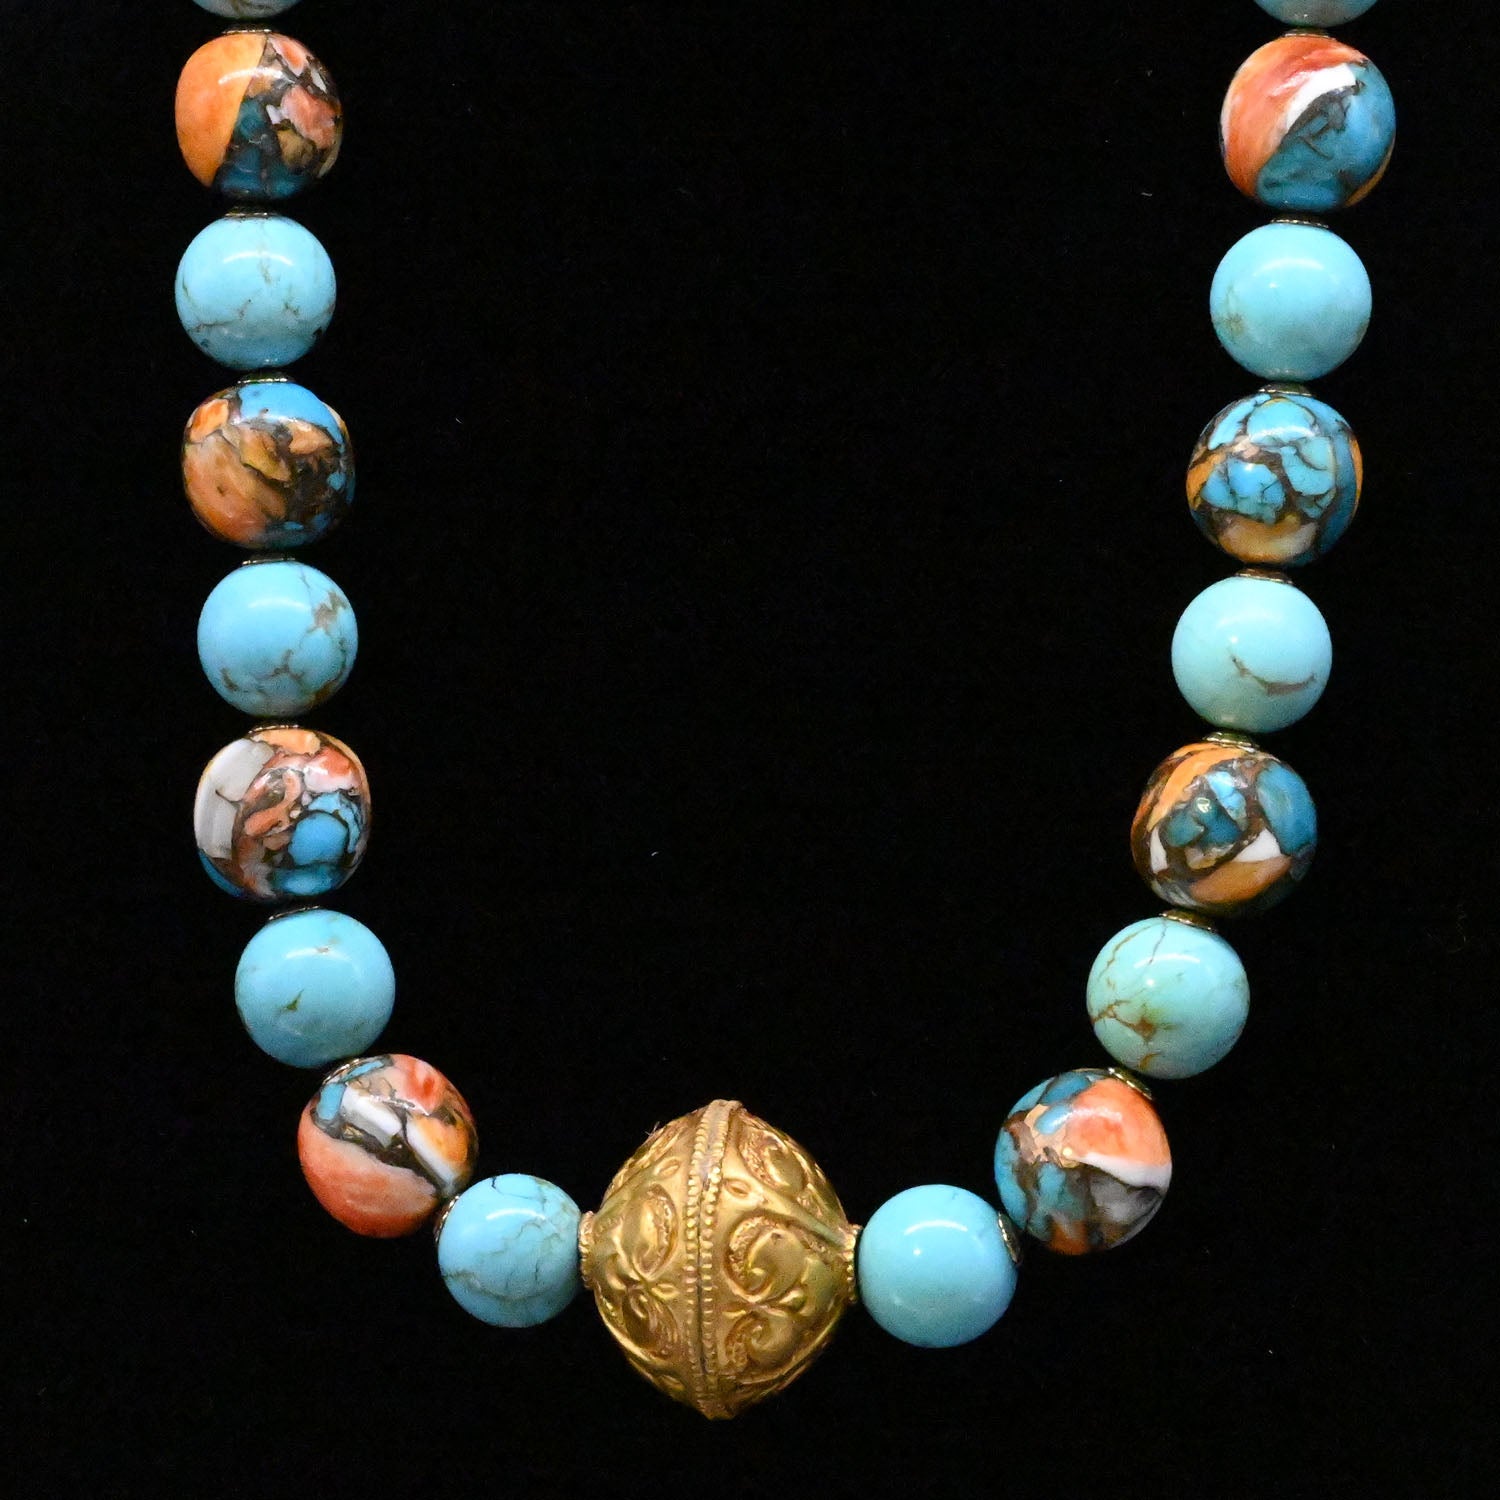 An Islamic Gold Pendant on Turquoise Bead Necklace<br><em>Seljuk Period, ca. 10th - 12th century CE</em>